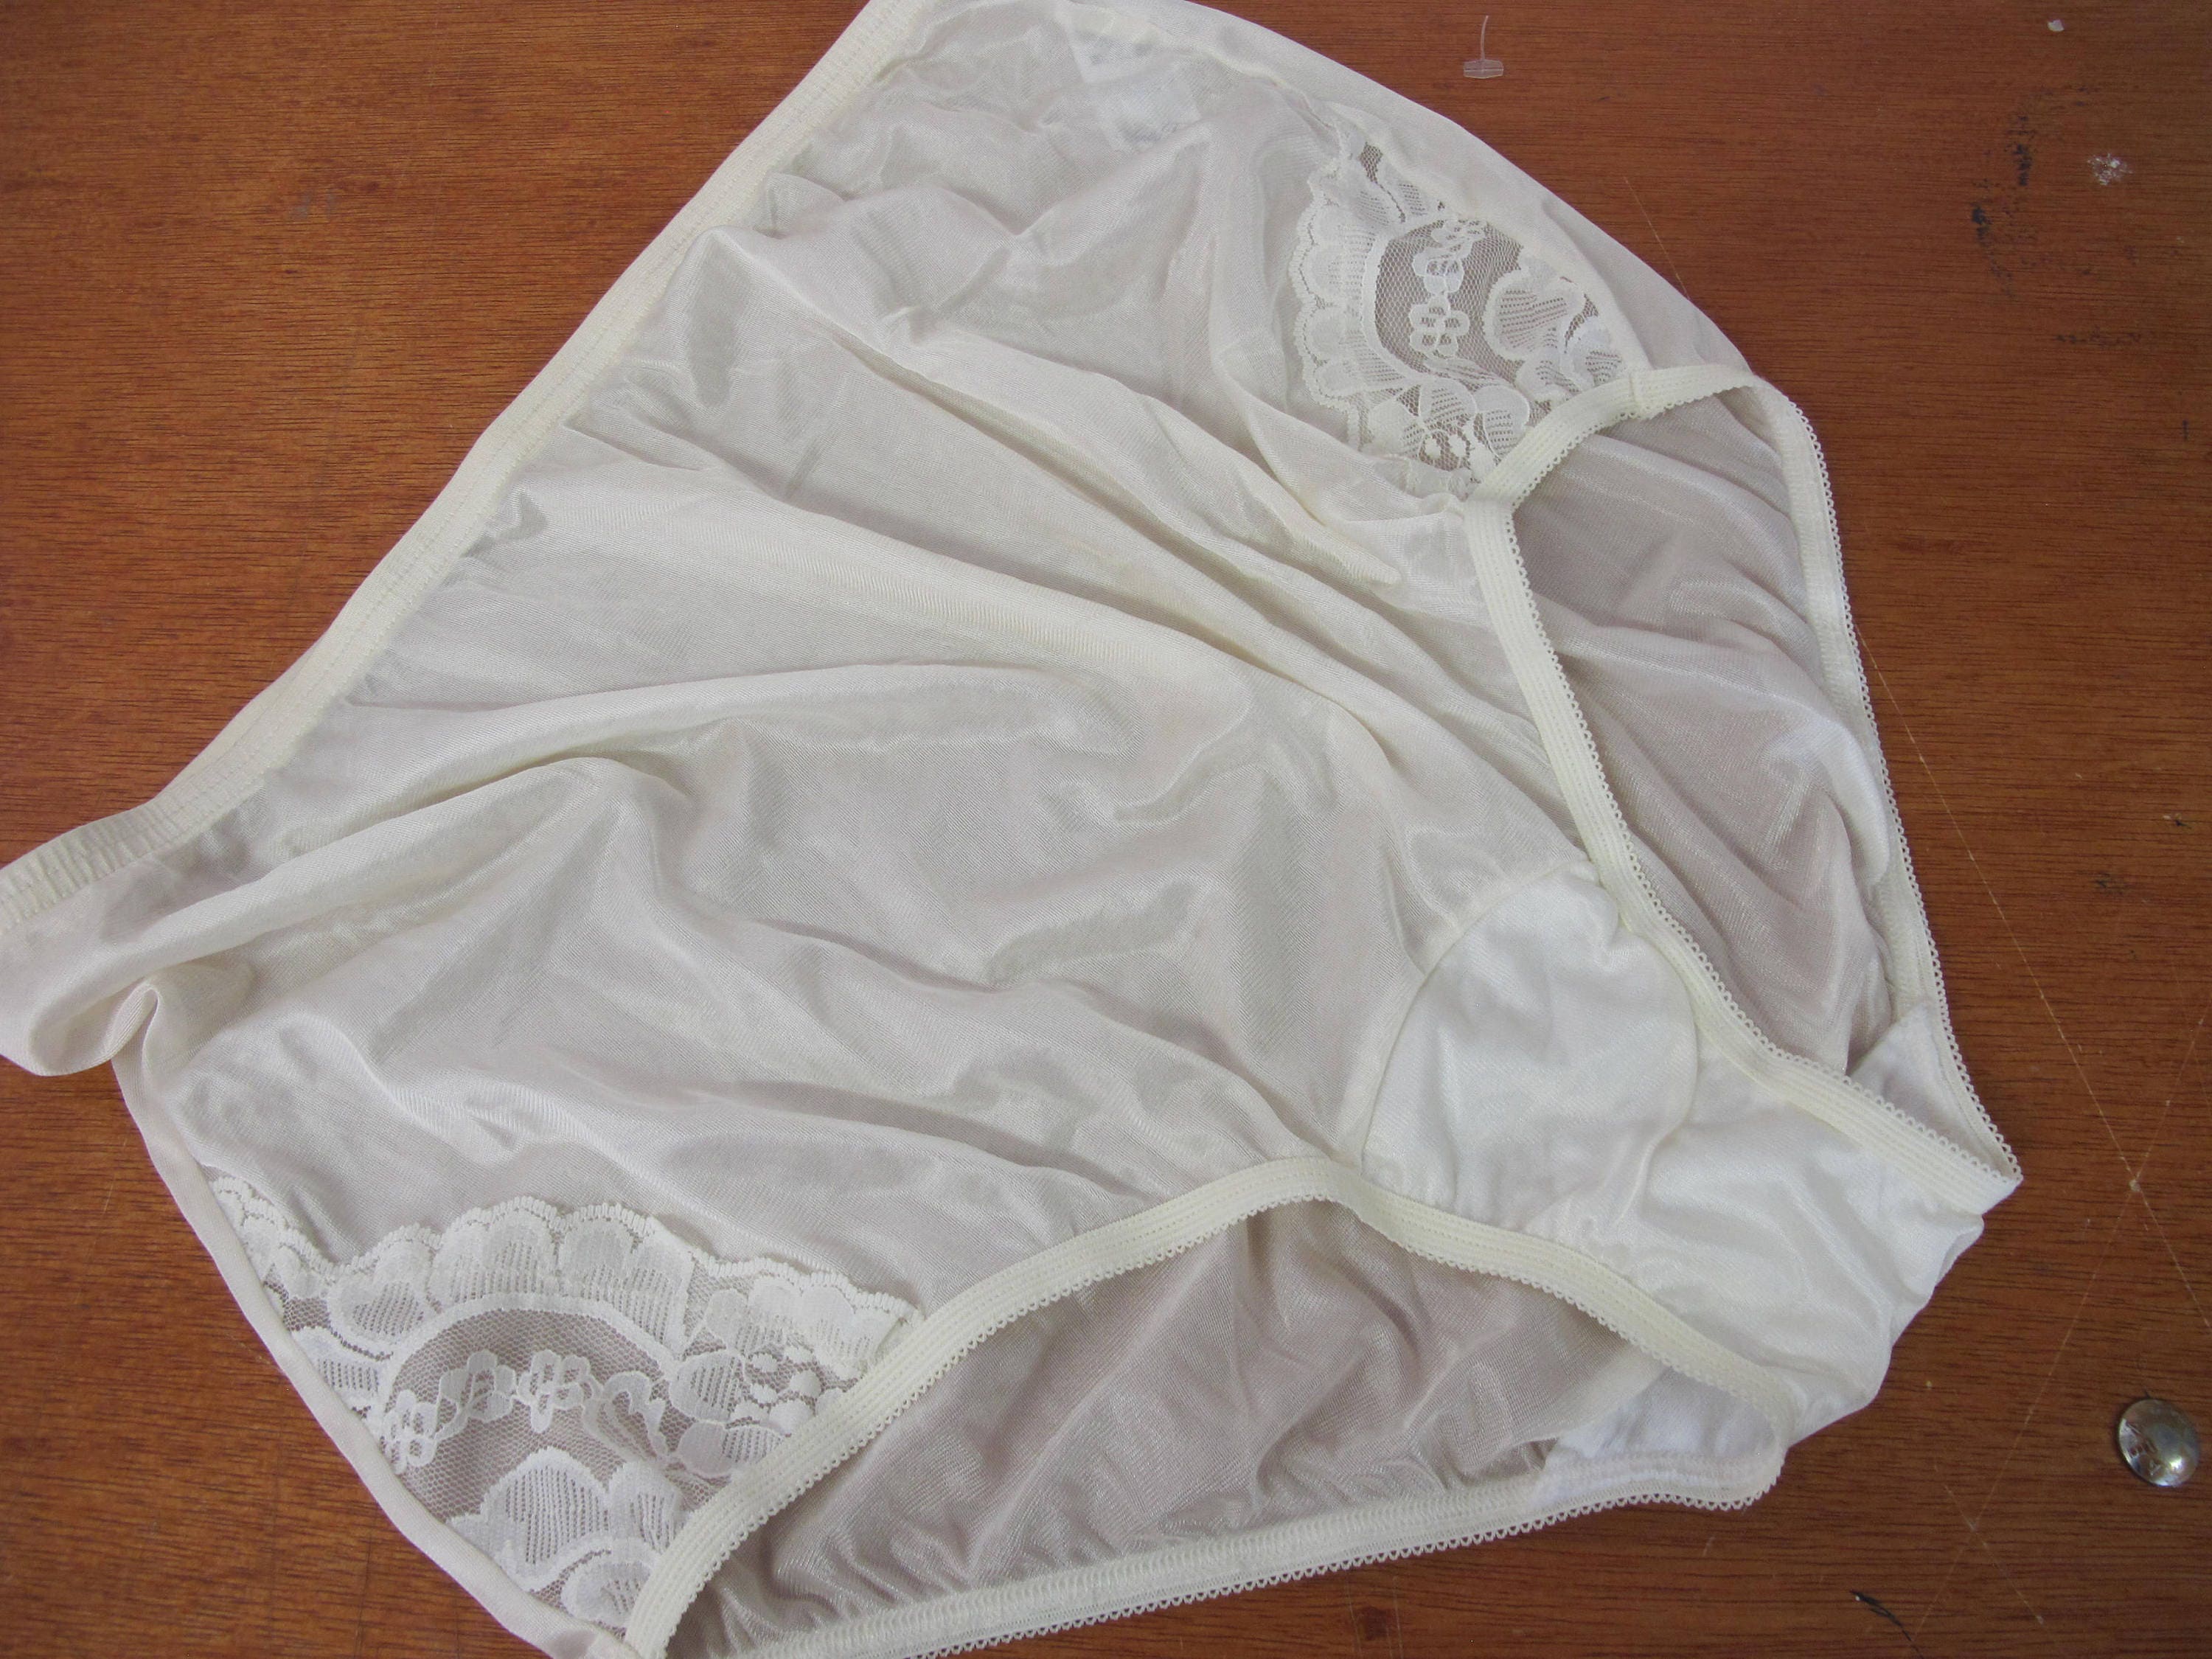 Nylon Panties for sale | Only 4 left at -60%